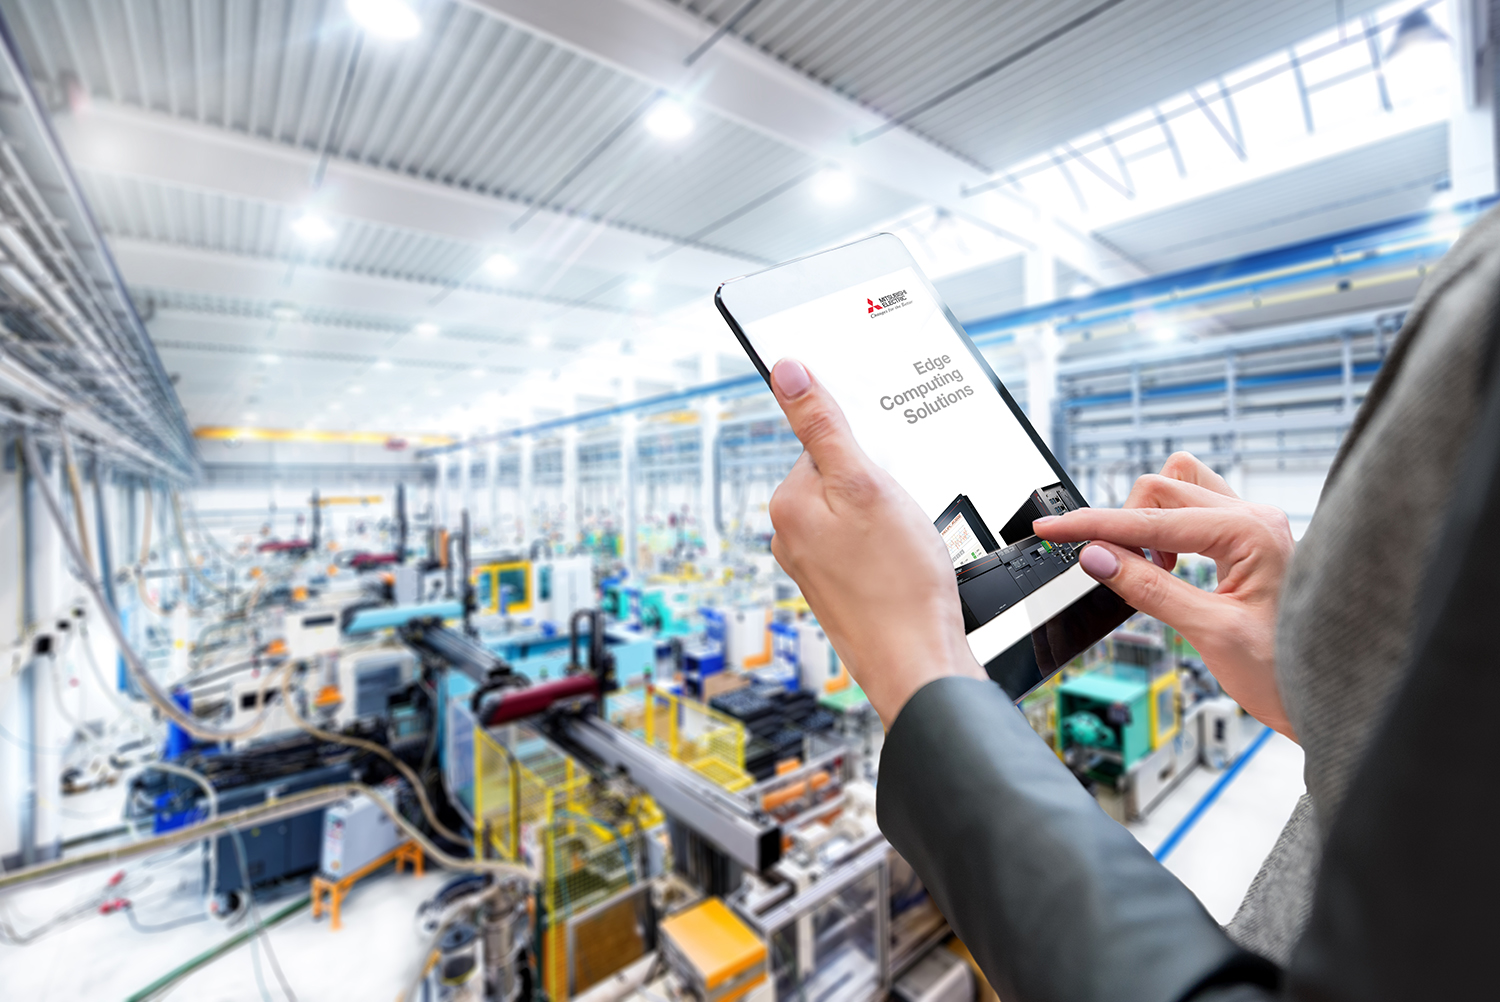 The digital transformation of a business is dependent on forming an intermediate layer between the shop floor and the higher-level business systems, by using Edge computing solutions. [Source: Mitsubishi Electric Europe B.V]